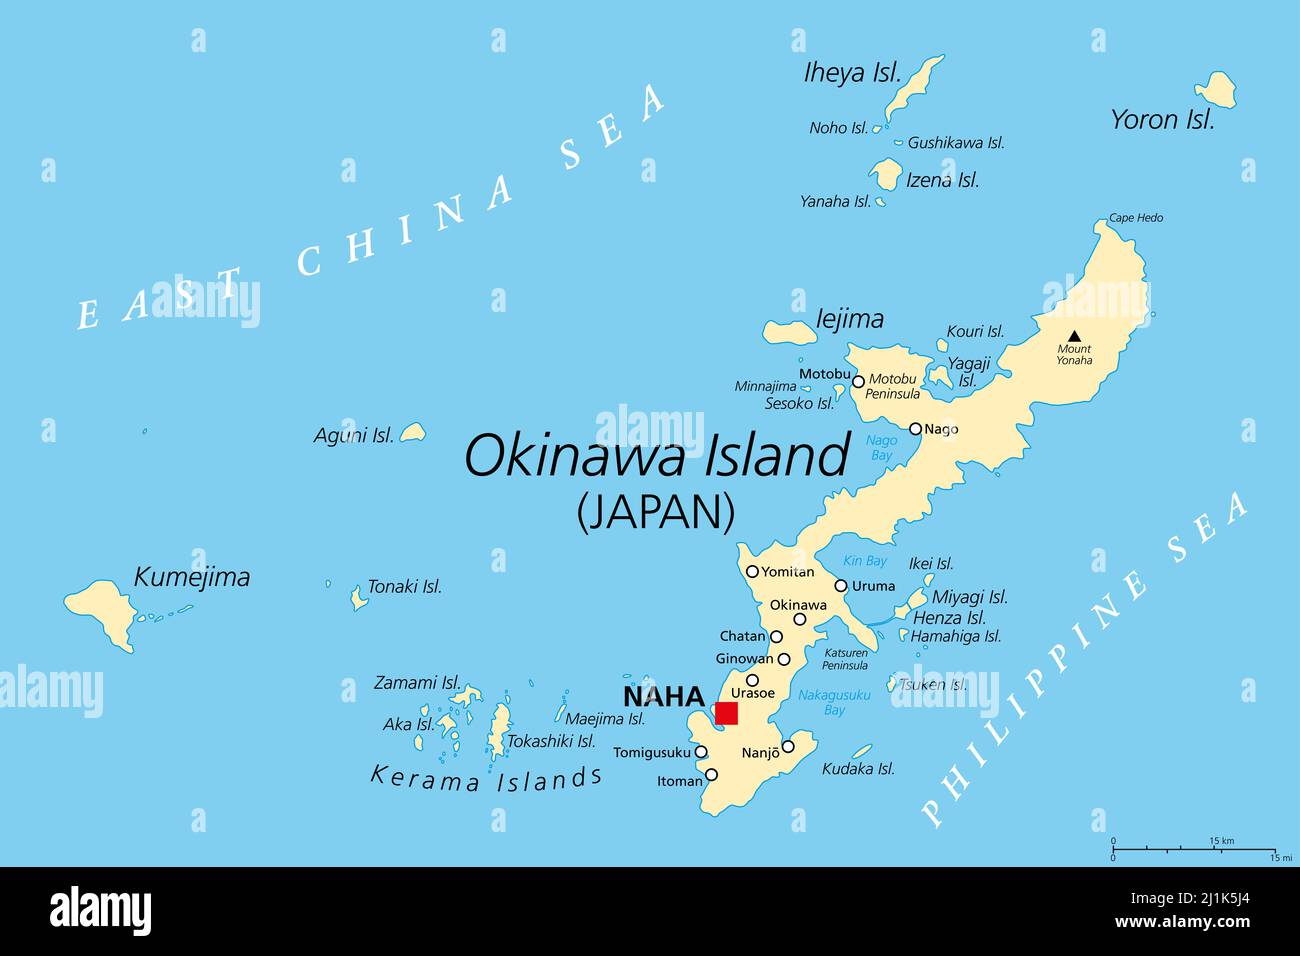 Okinawa Islands, political map. Island group in the Okinawa Prefecture of Japan, in the East China Sea, with the capital Naha. Part of  Ryukyi Islands. Stock Photo